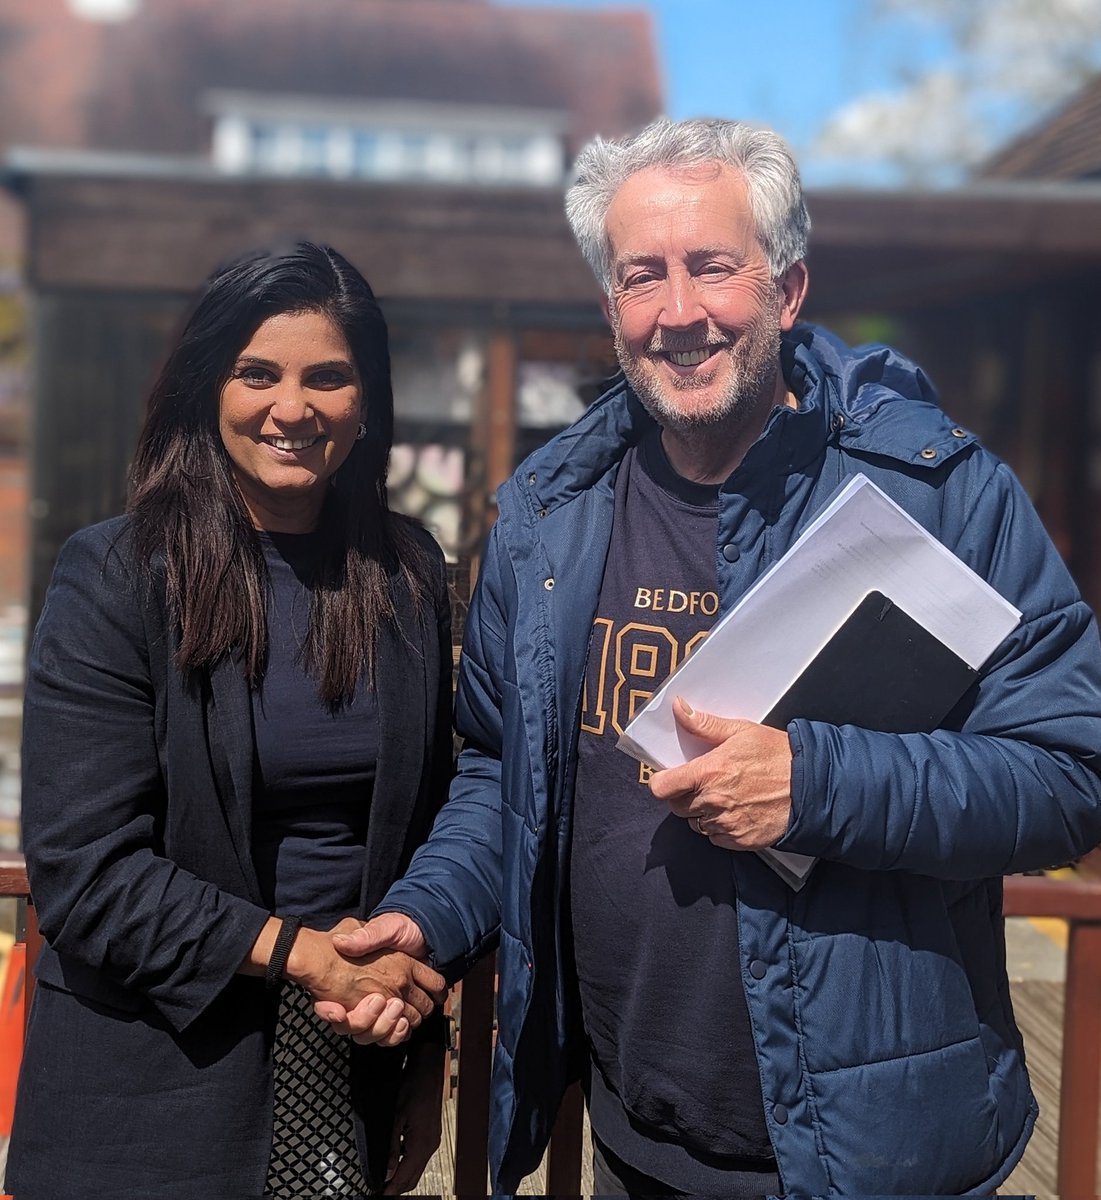 We are delighted to announce Cllr Shazna Muzammil has been elected as the new Leader of the Conservative Group on Milton Keynes City Council. Thank you to Cllr David Hopkins for his dedicated service as Group Leader over the past two years.